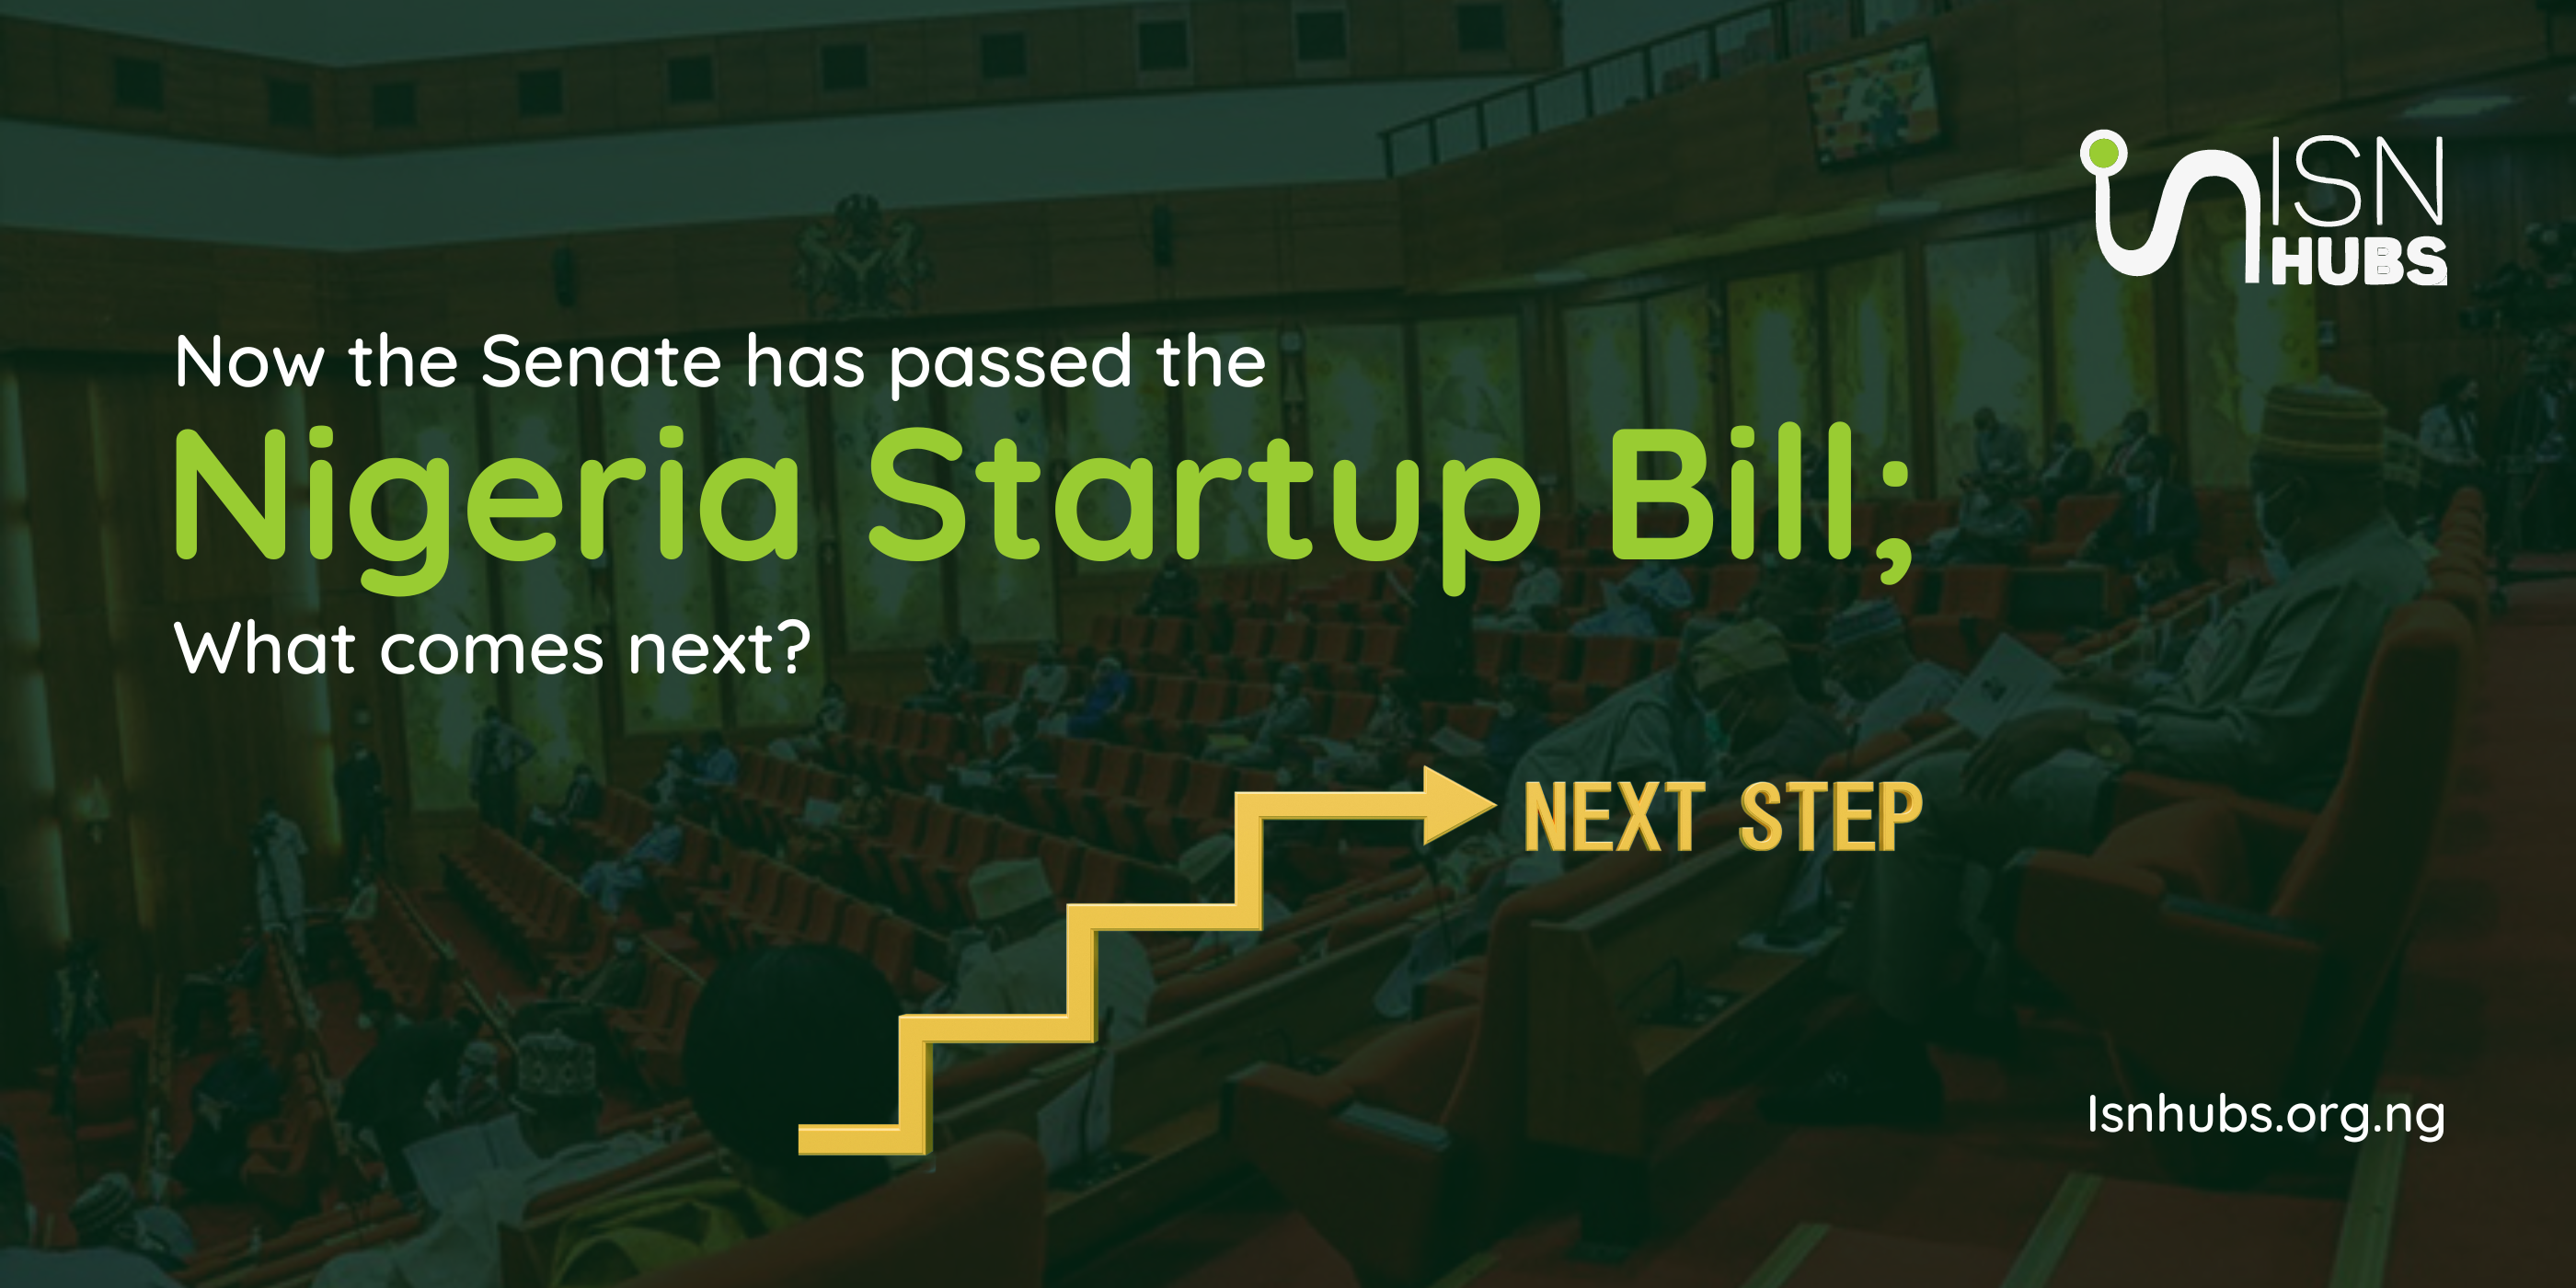 What is the next step for the Nigeria Startup Bill?